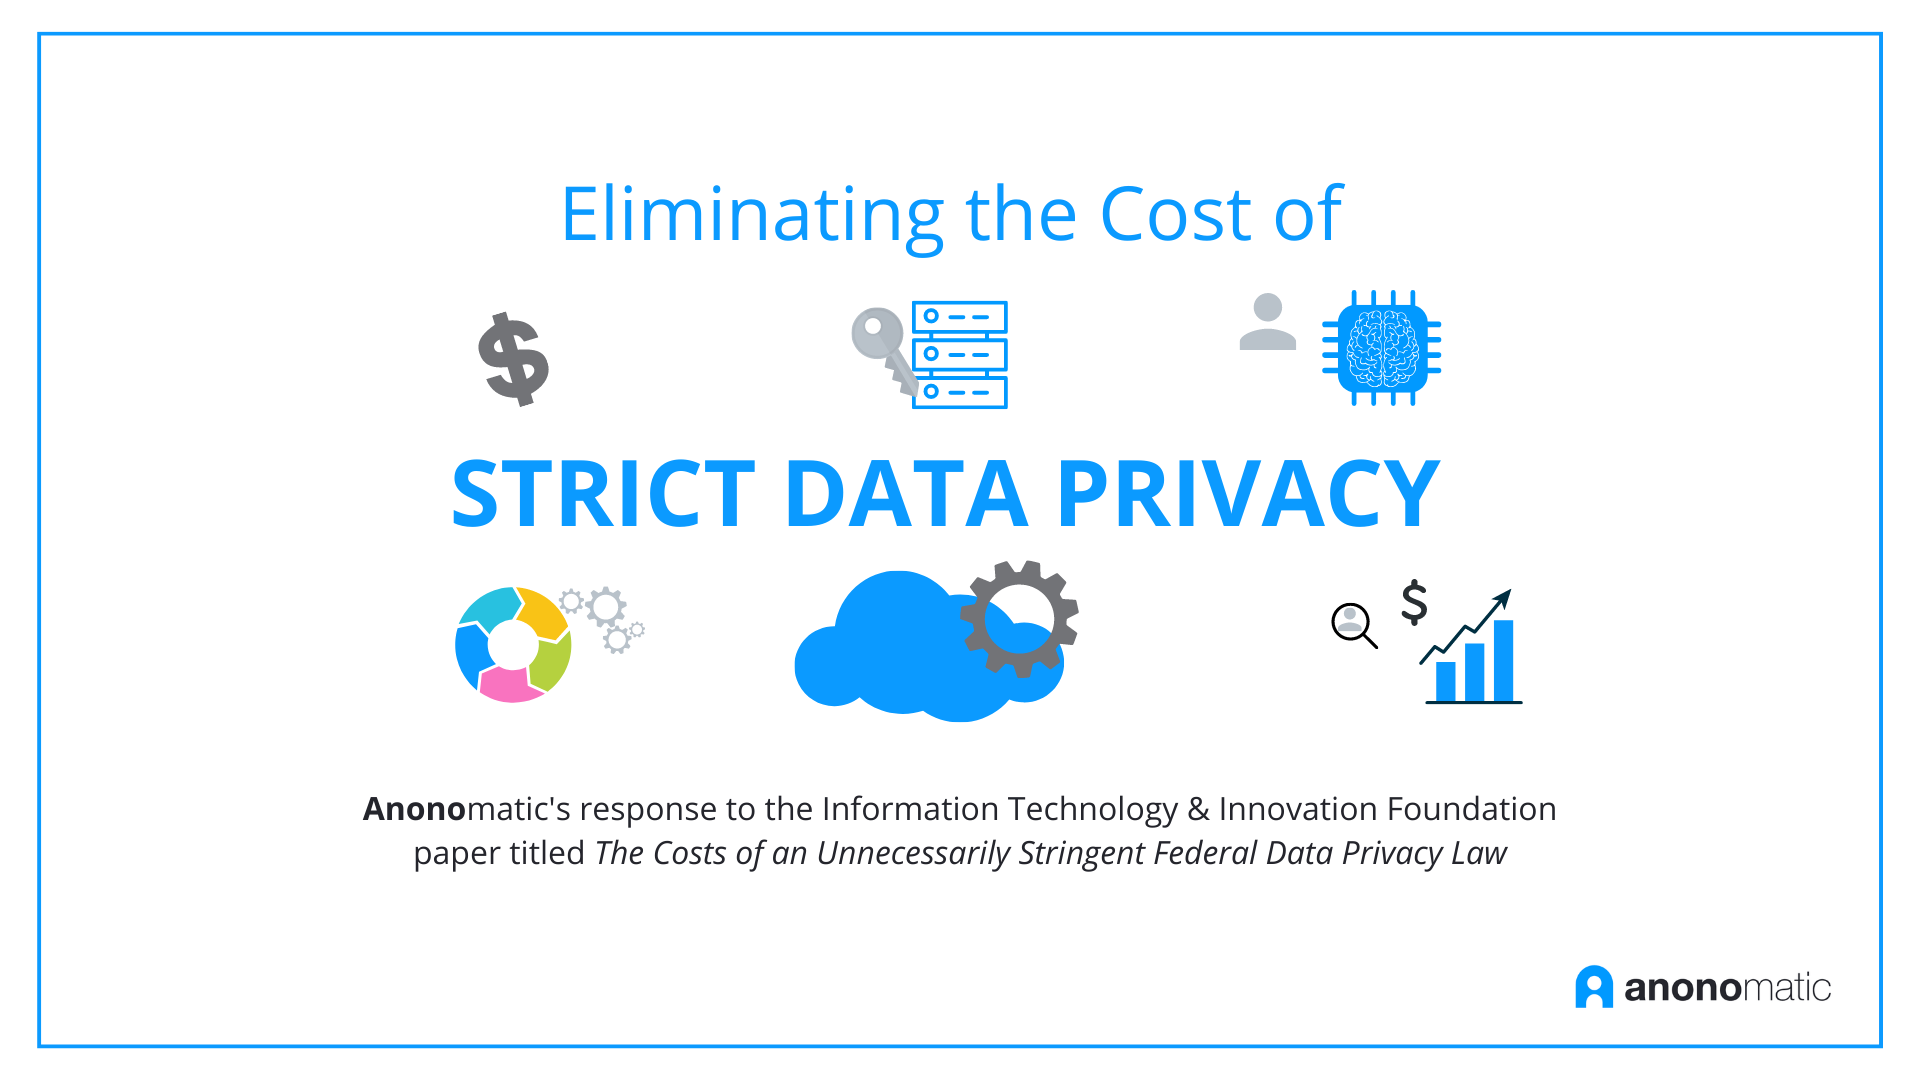 Eliminating the cost of strict data privacy